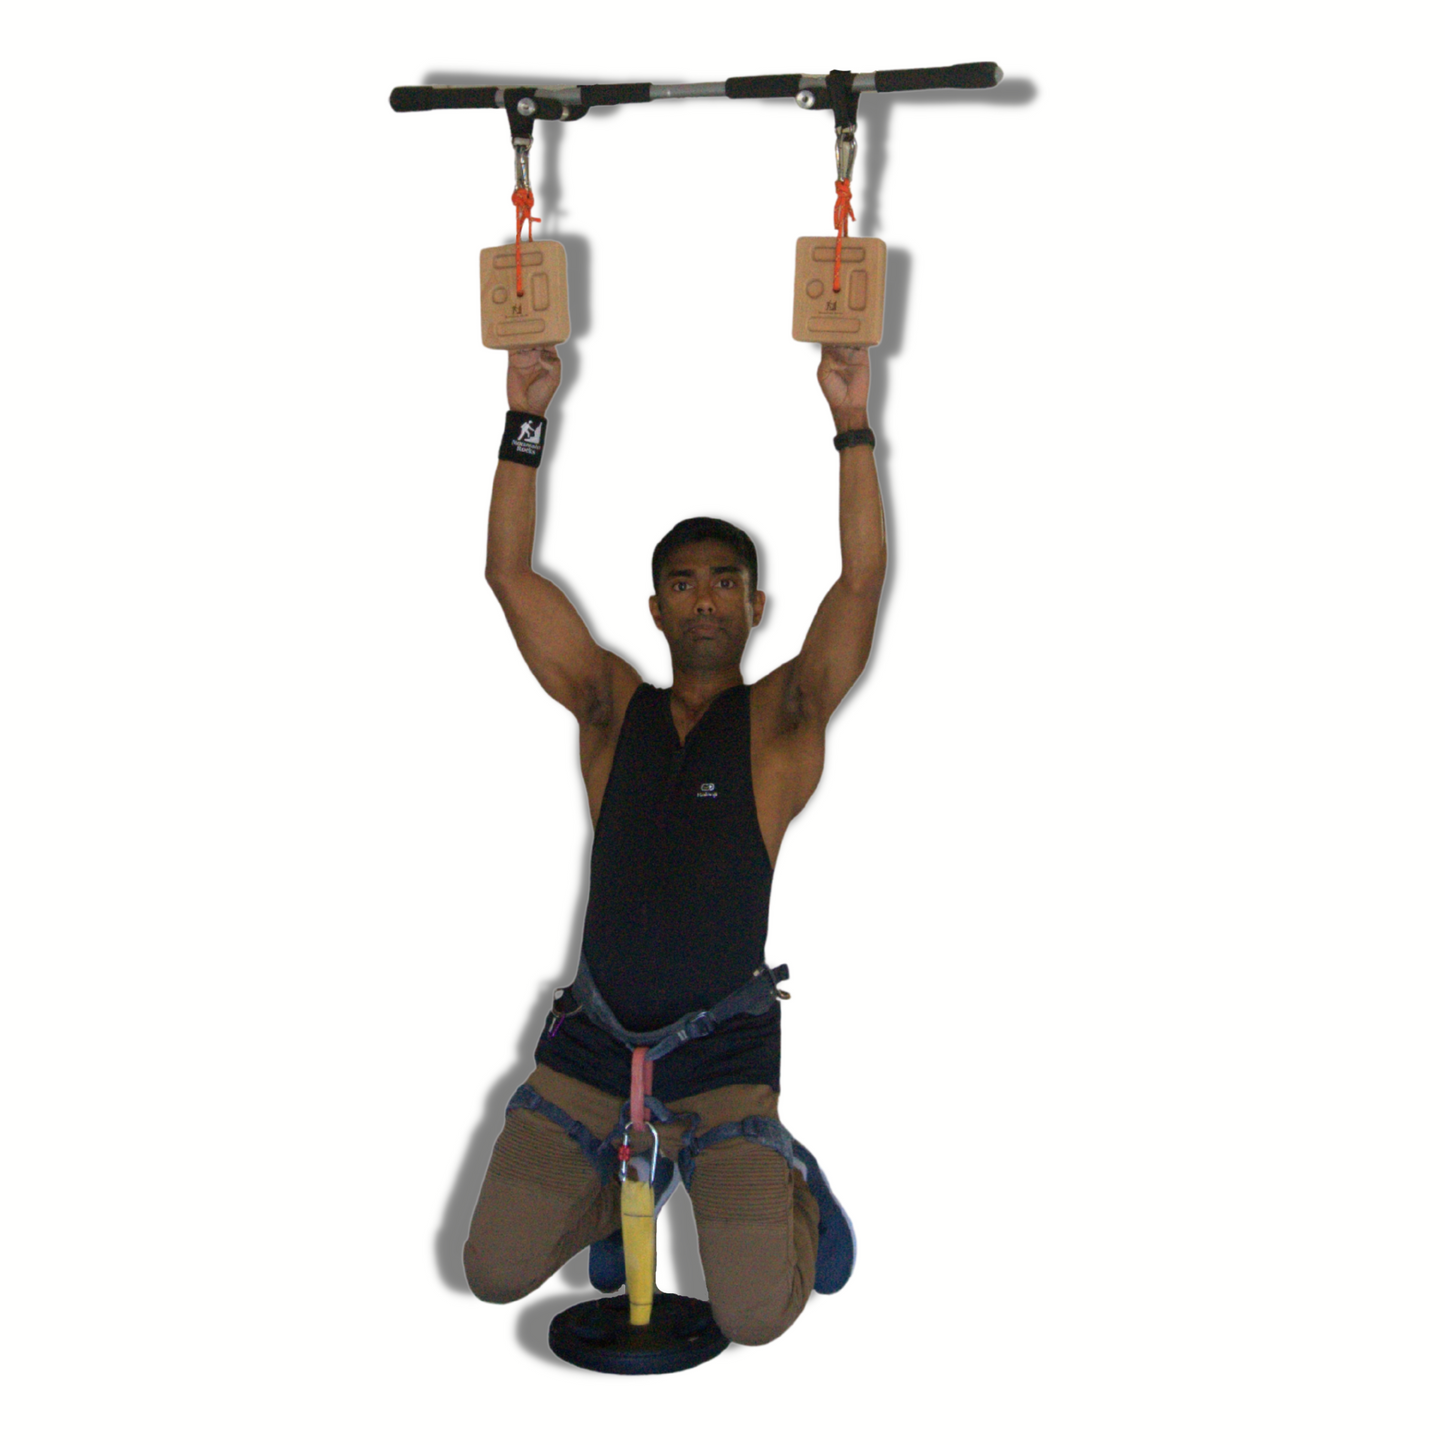 Portable Hangboard with Strap Loading Pin for Hangboard, Pinch Grip Training and Farmer Crimps